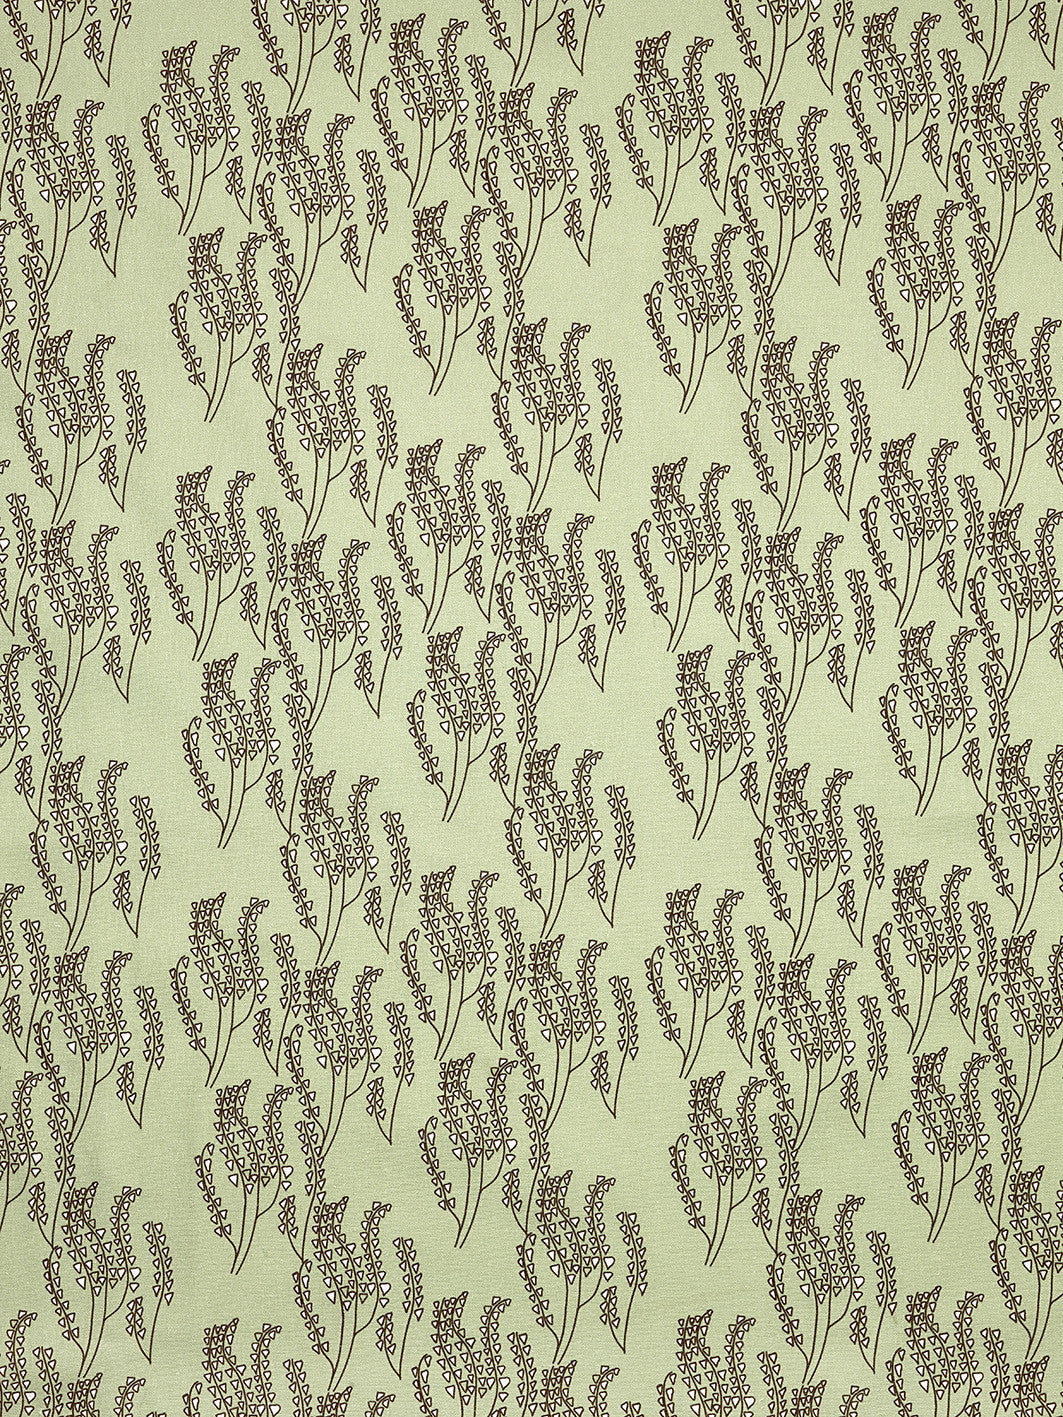 Maricopa Graphic Floral Pattern Cotton Linen Home Decor Fabric by meter or yard for curtains, blinds, upholstery in Light Eau de Nil Green and Grey Ships from Canada (USA)